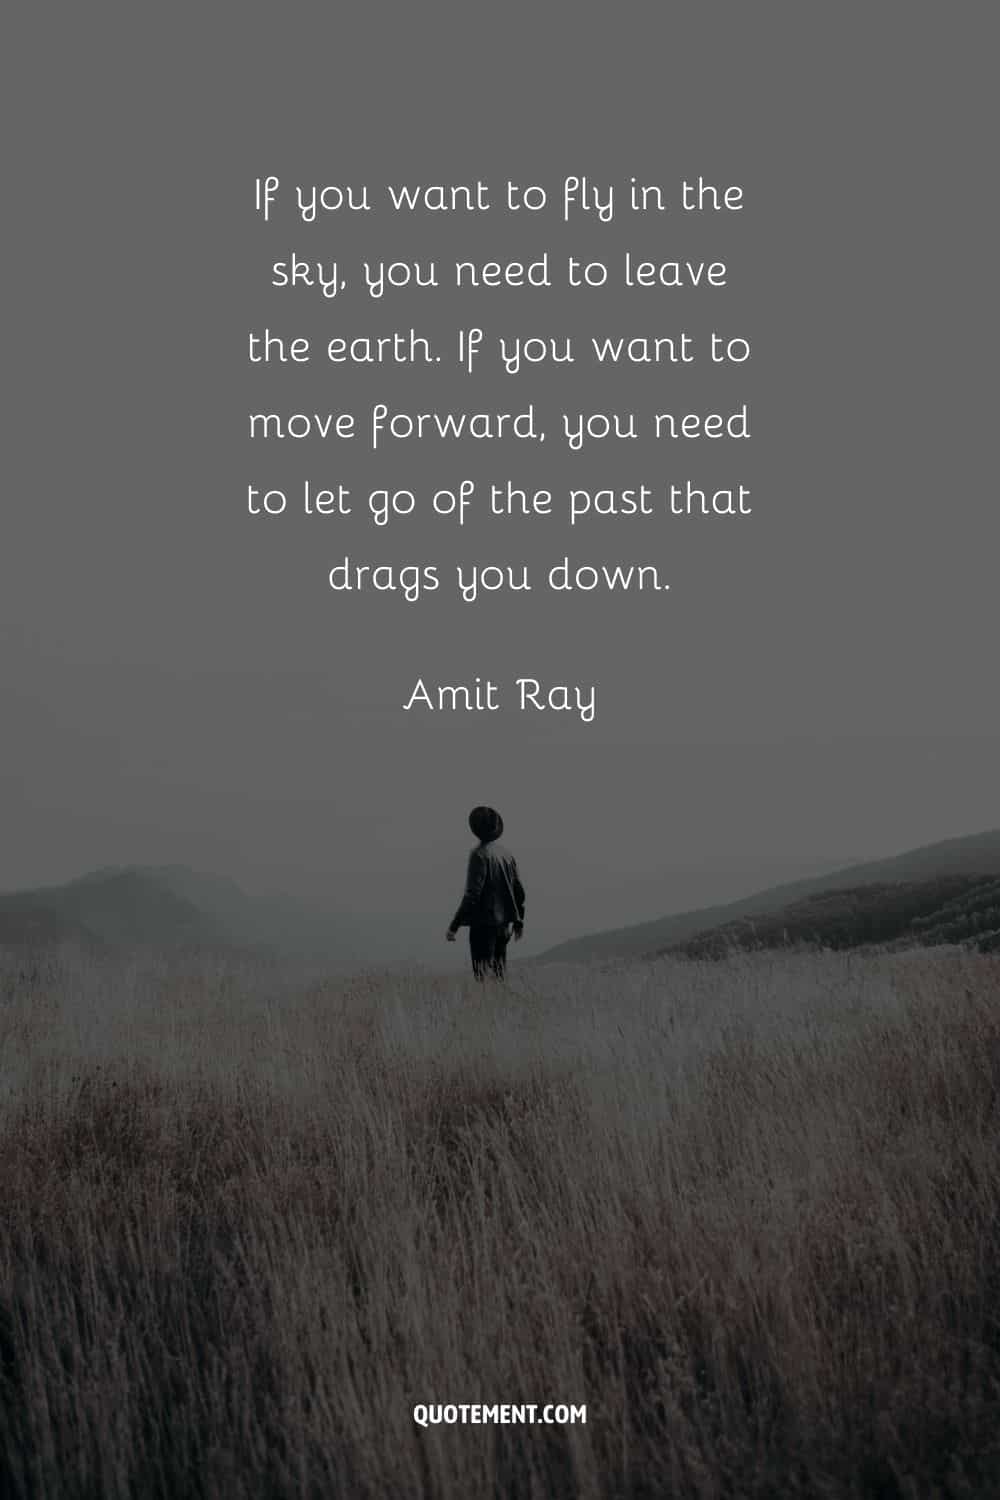 If you want to fly in the sky, you need to leave the earth. If you want to move forward, you need to let go of the past that drags you down. — Amit Ray